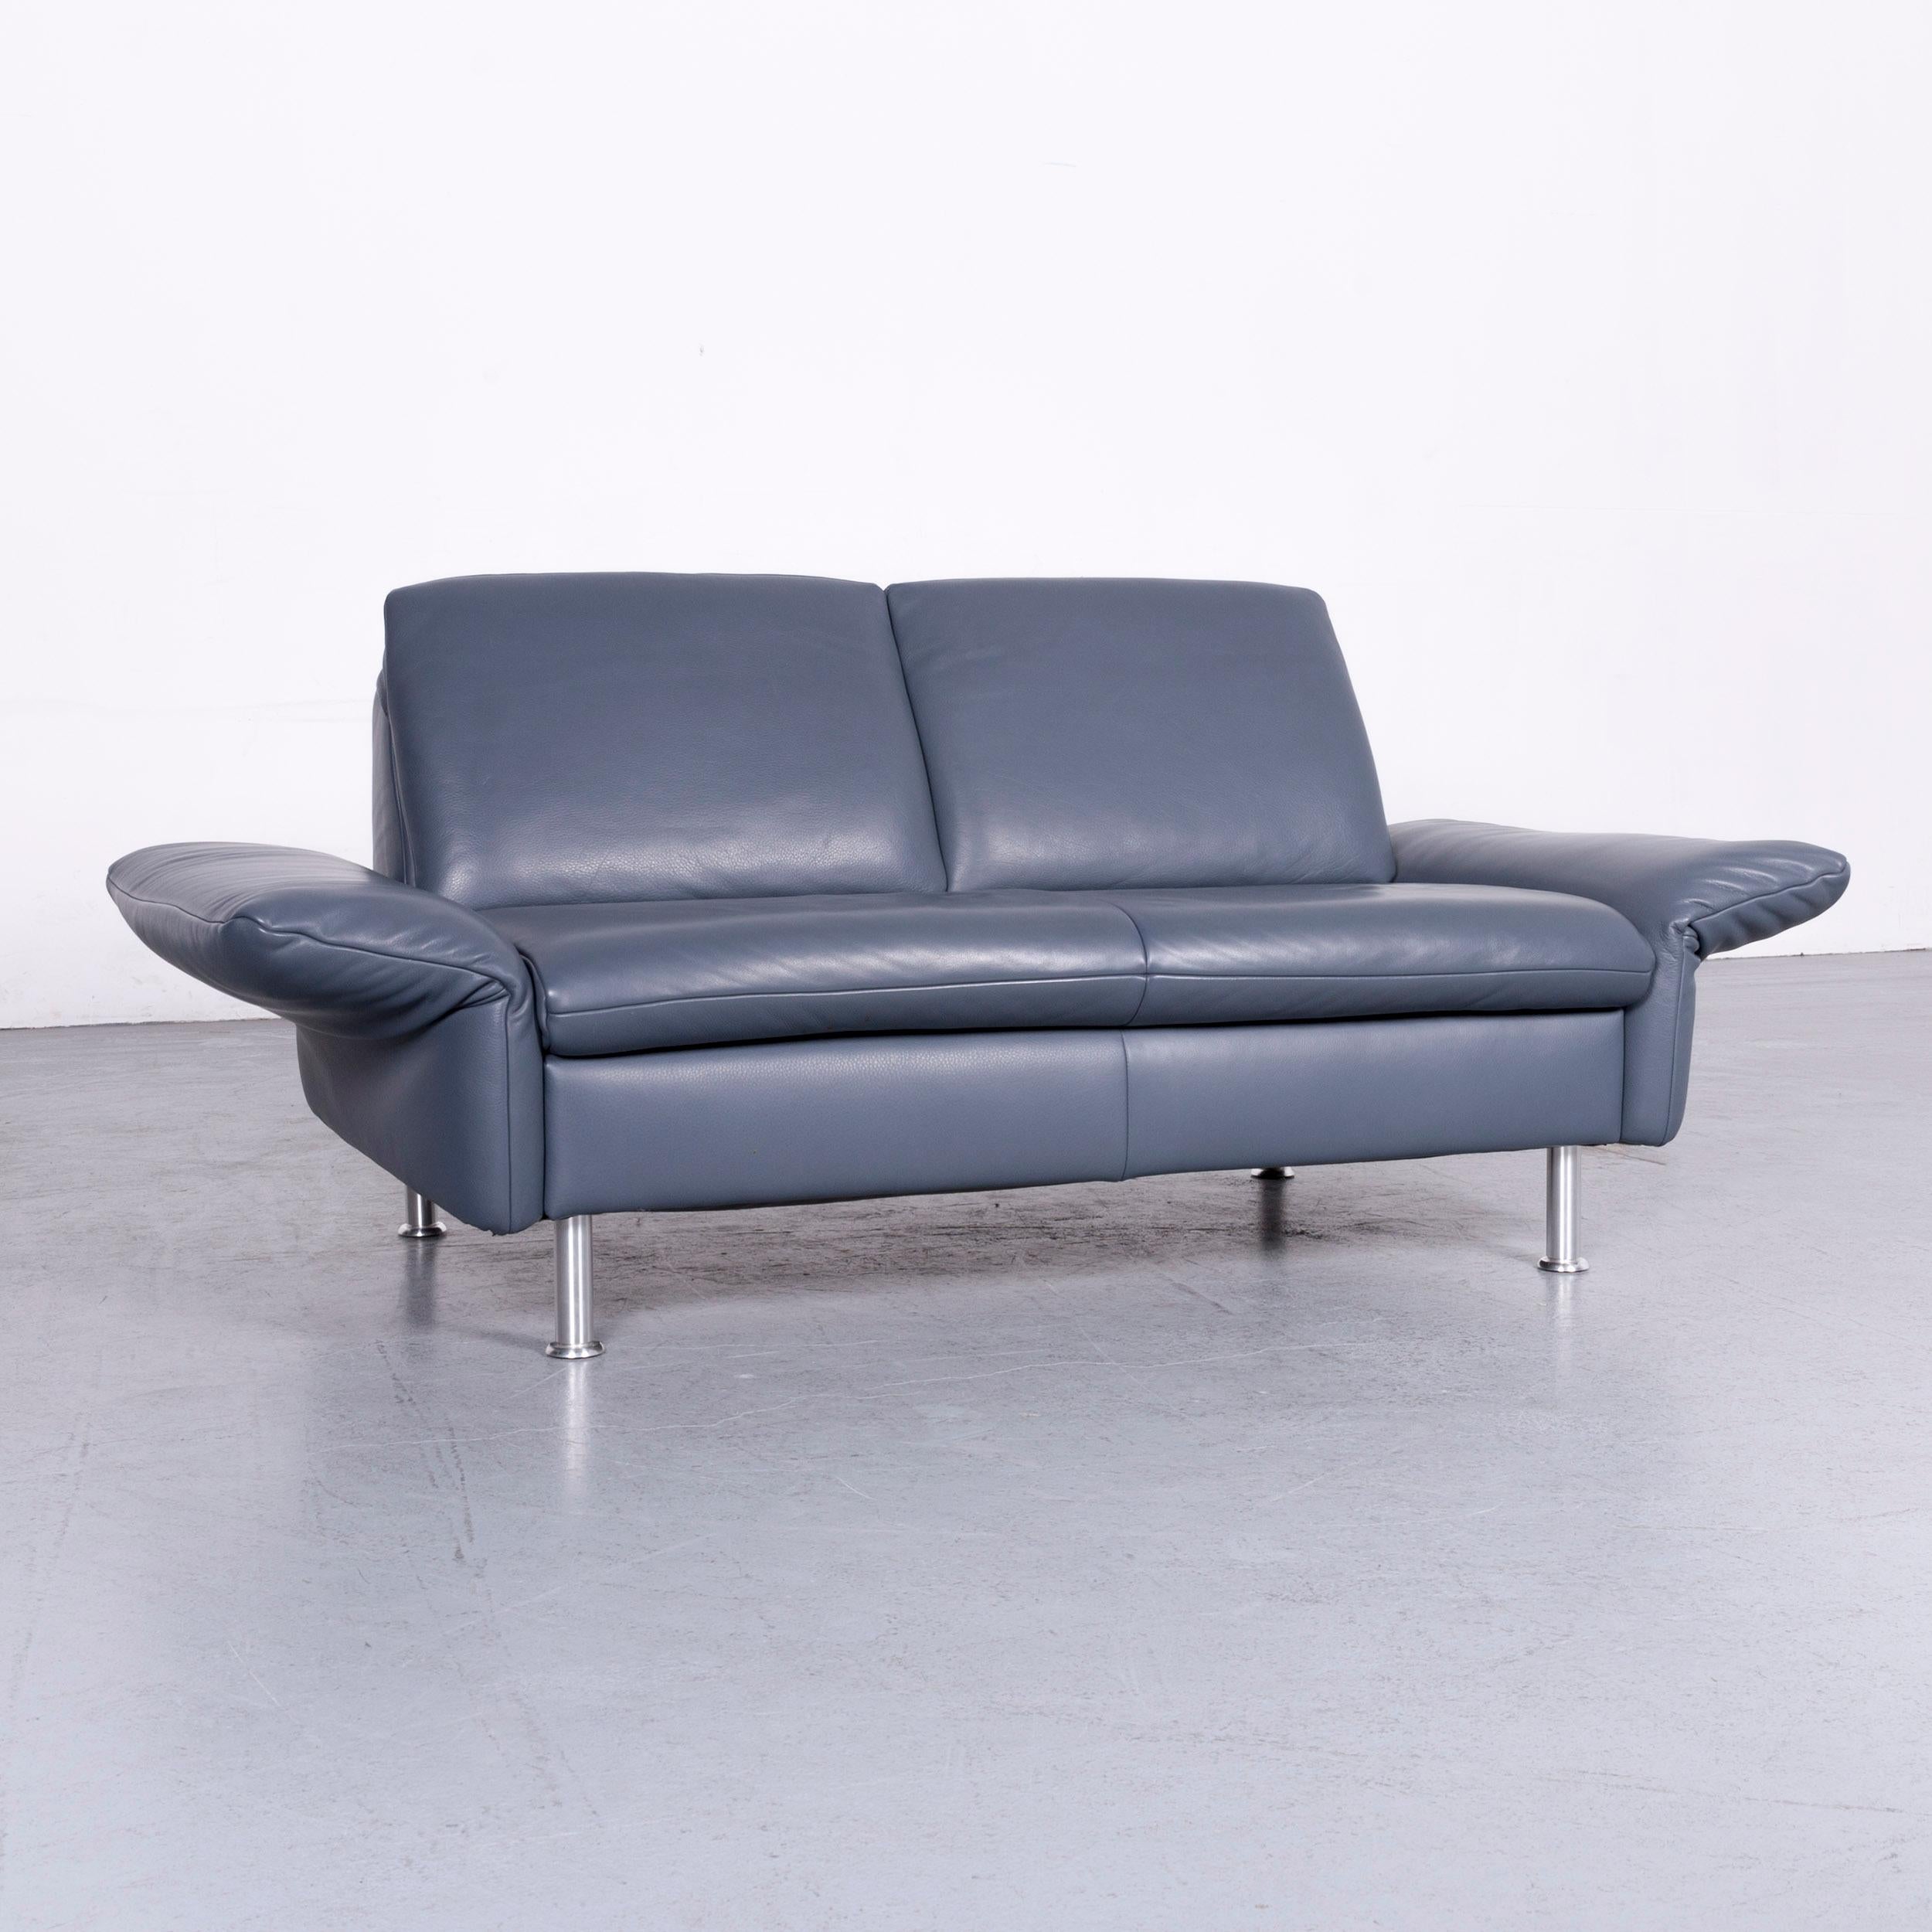 We bring to you a Koinor designer two-seat sofa blue leather couch.